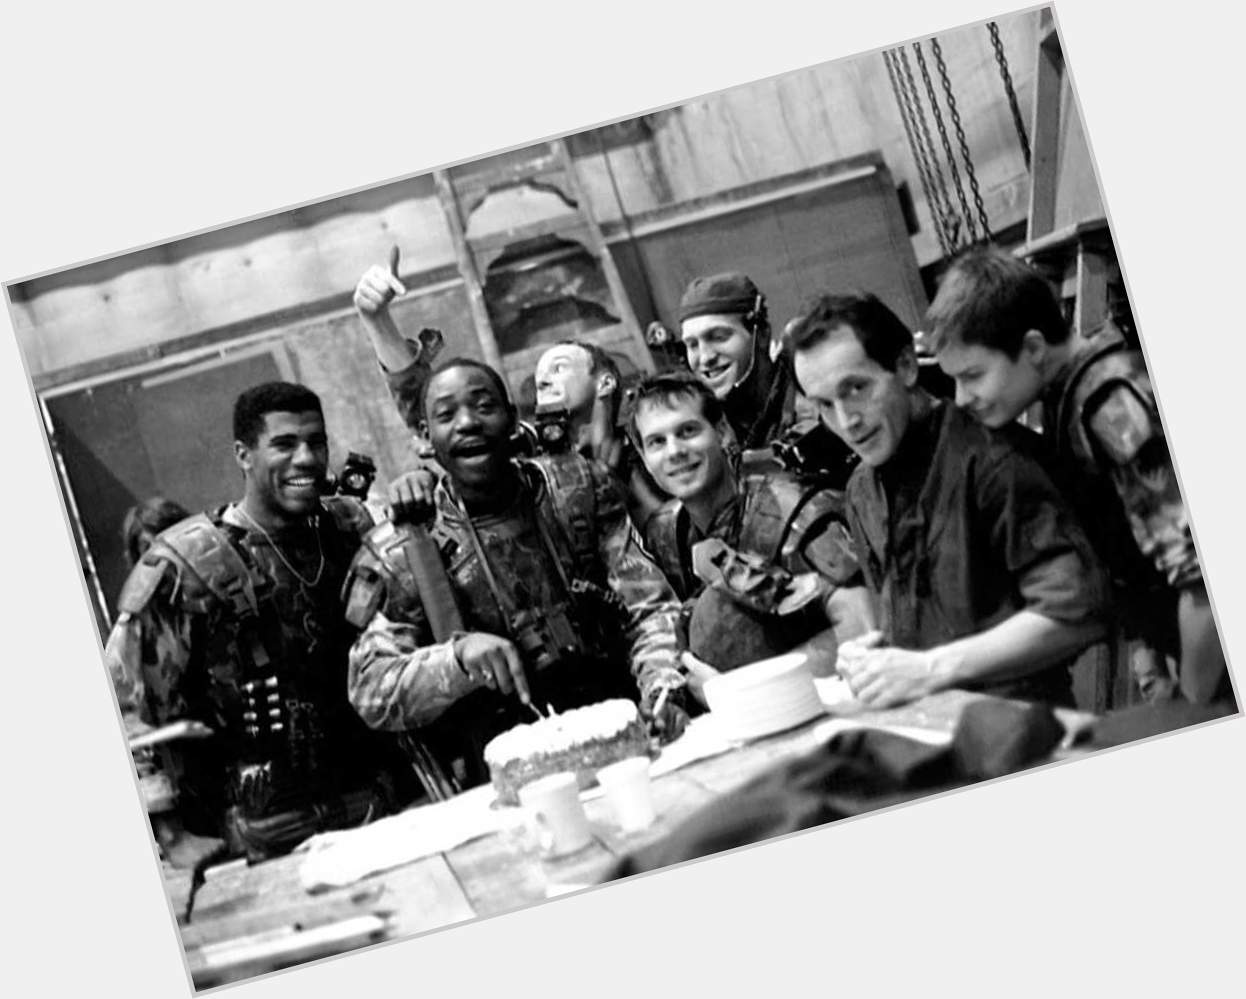 Happy 73rd birthday to Al Matthews seen here celebrating on the set of Aliens with his fellow cast! 